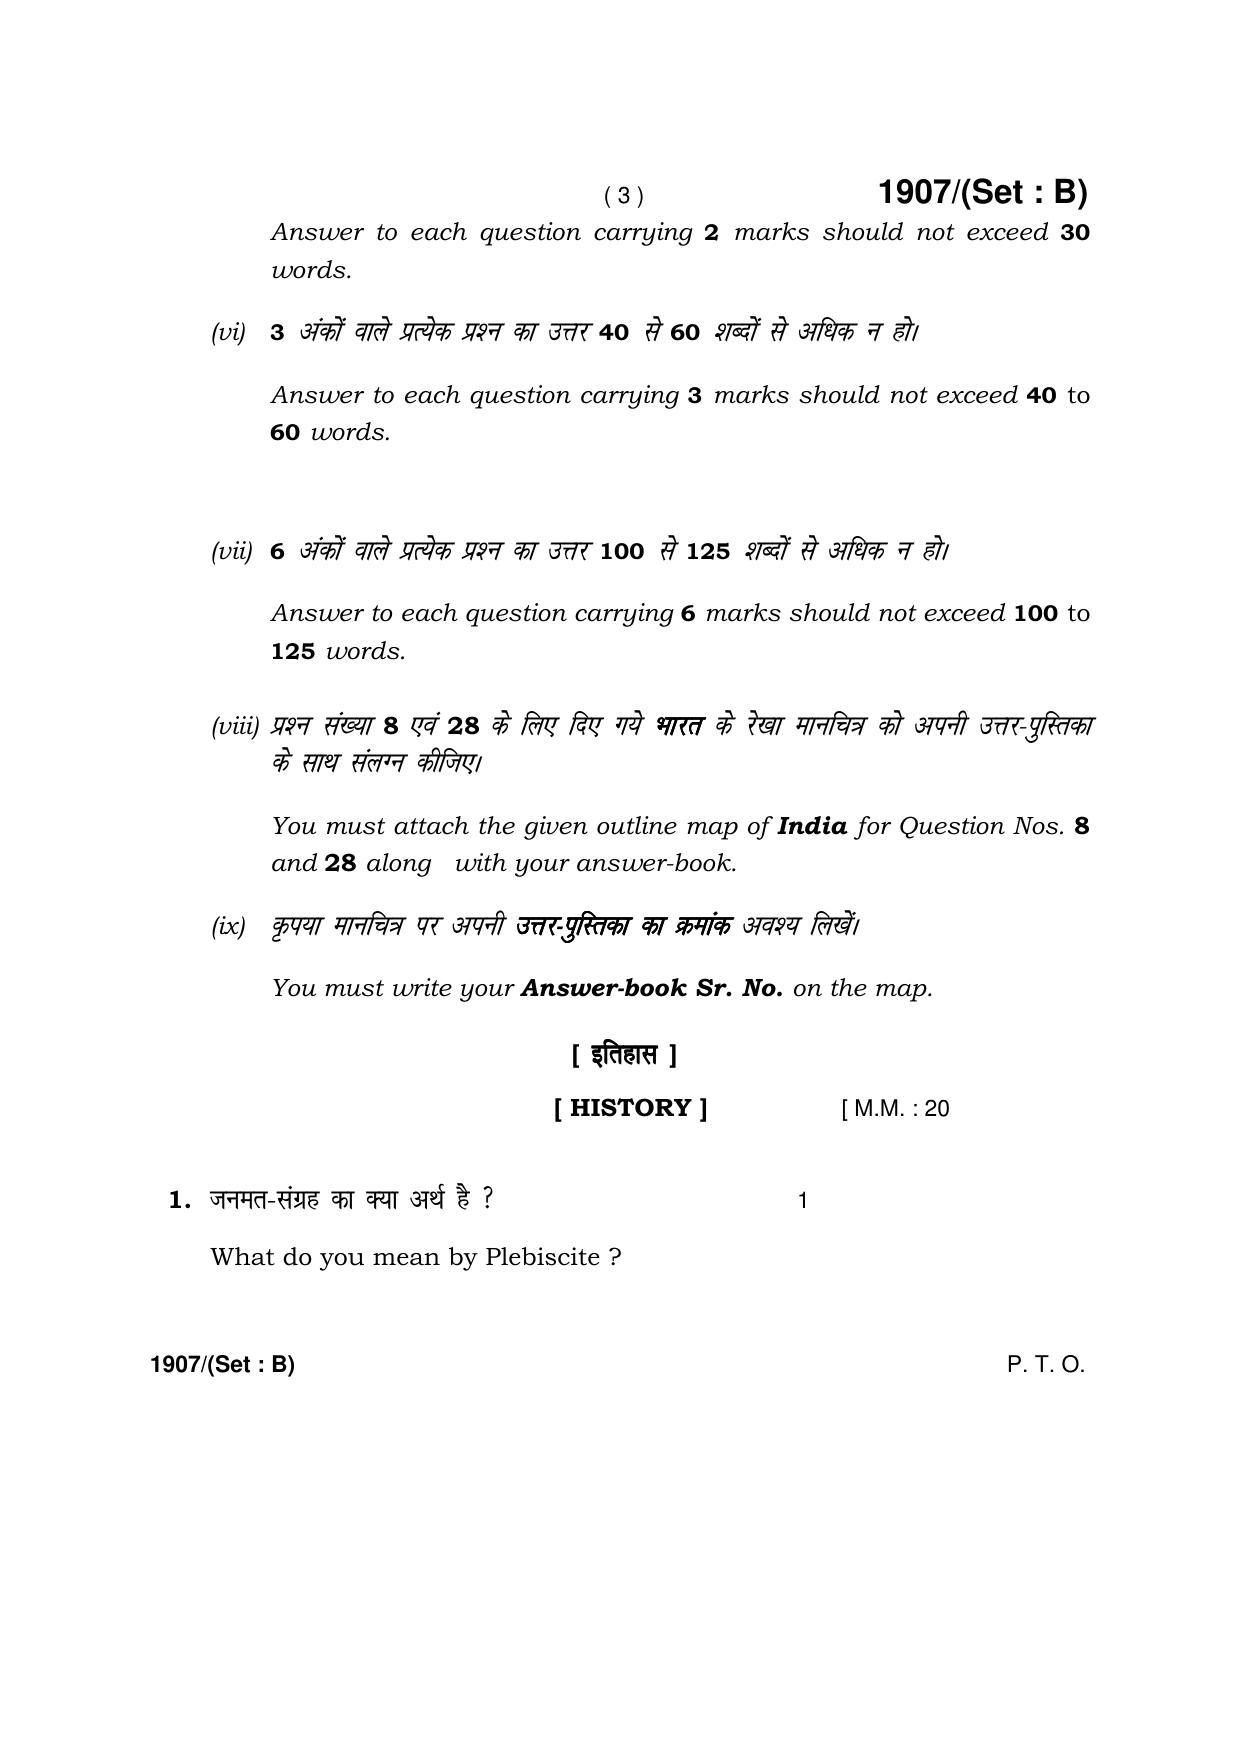 Haryana Board HBSE Class 10 Social Science -B 2017 Question Paper - Page 3